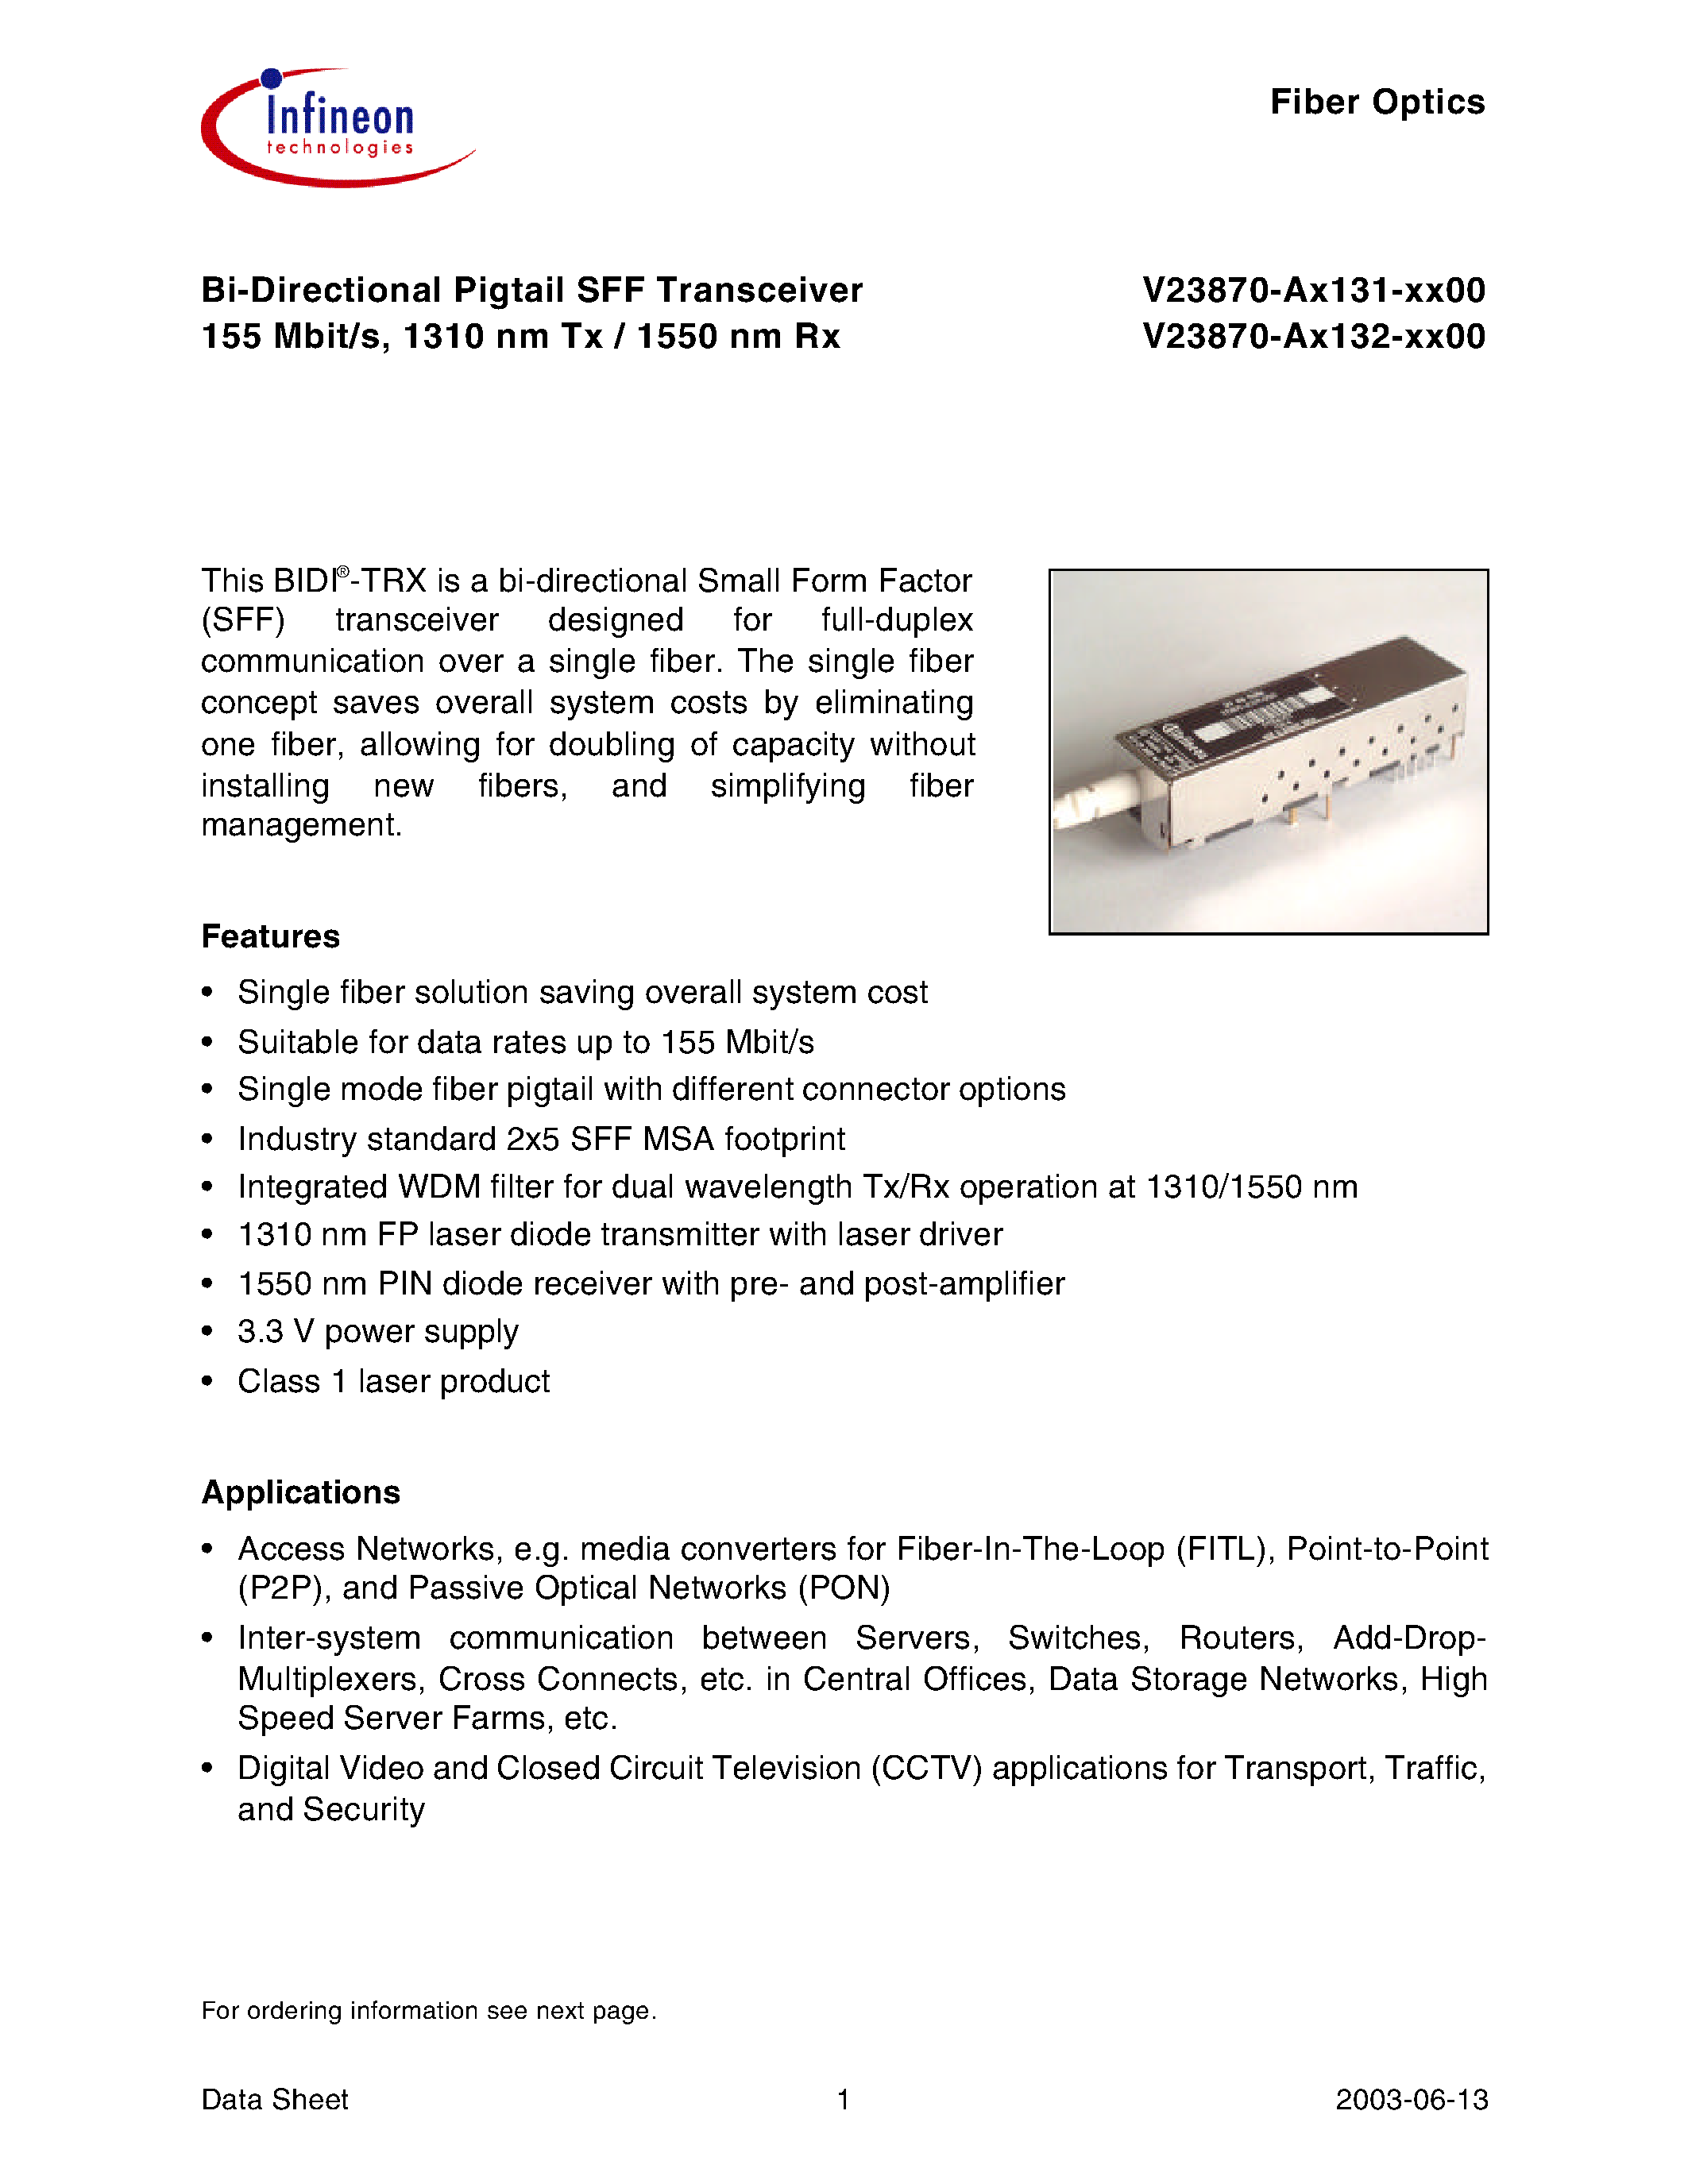 Datasheet V23870-A1132-B100 - Bi-Directional Pigtail SFF Transceiver 155 Mbit/s/ 1310 nm Tx / 1550 nm Rx page 1